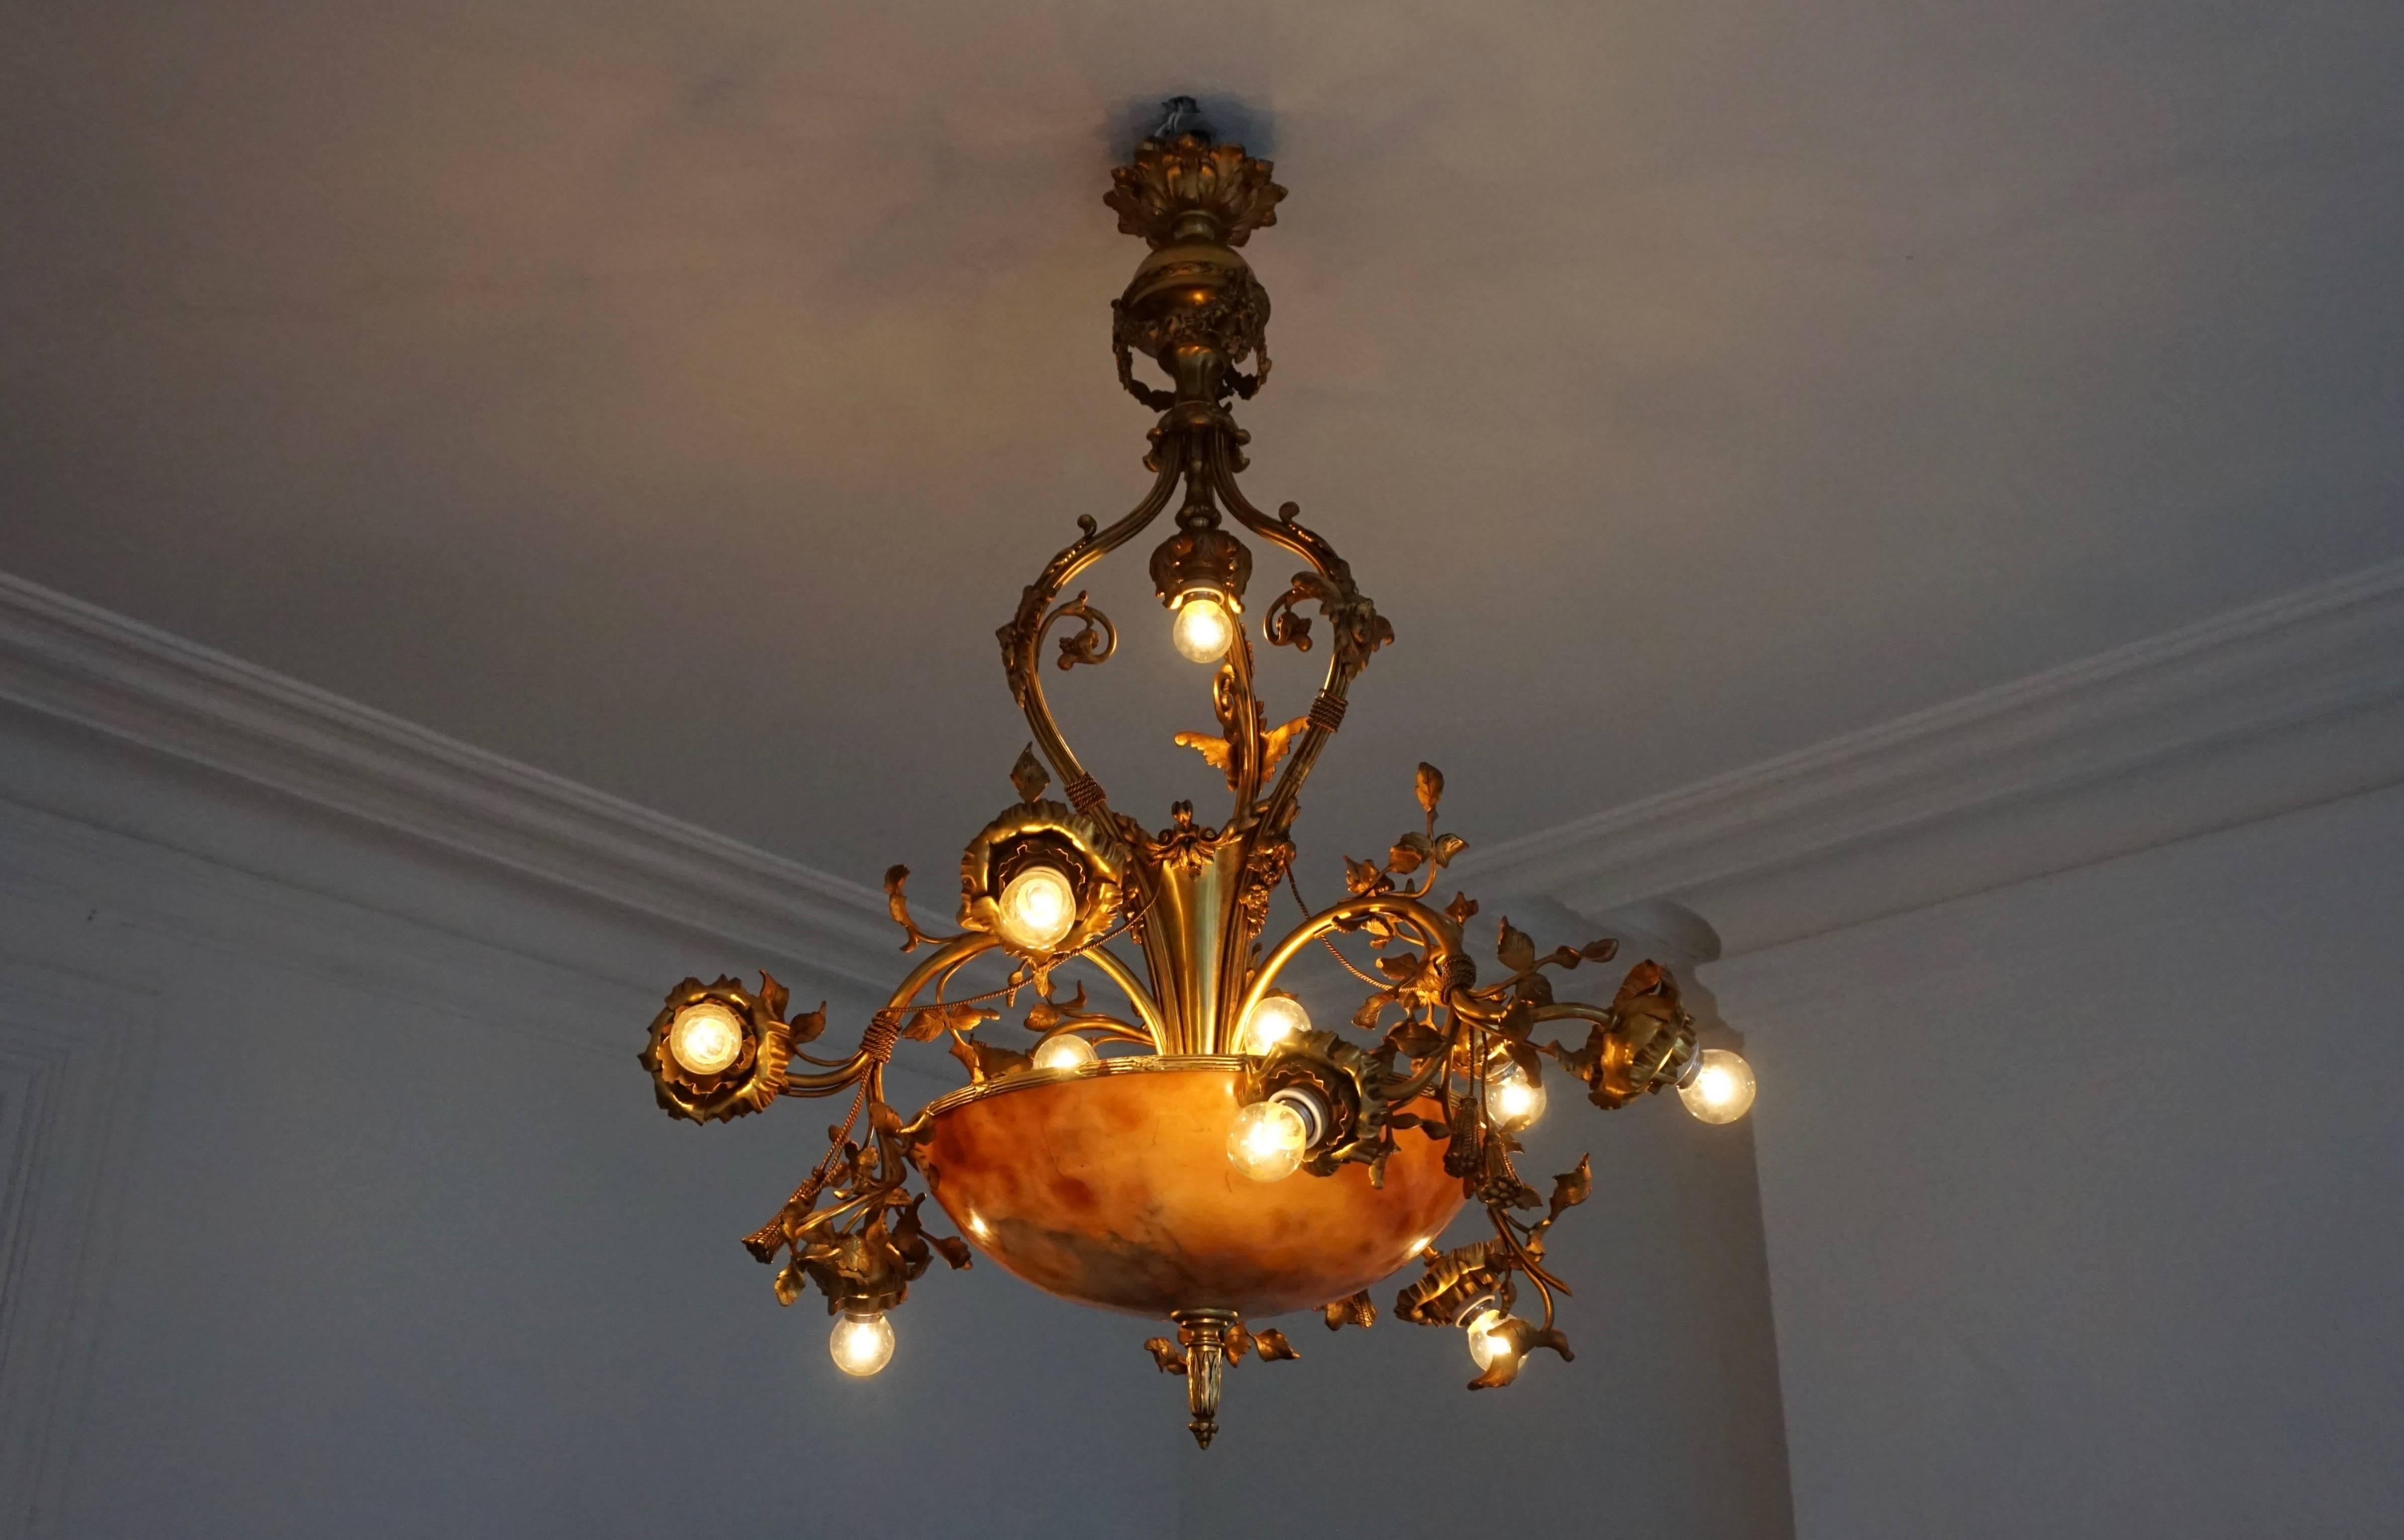 A fine bronze and alabaster Belle Époque chandelier, shaped as swirling and flowering rose branches, early 20th century.
Dimensions:
Diameter: 75 cm
Height: 100 cm.
 